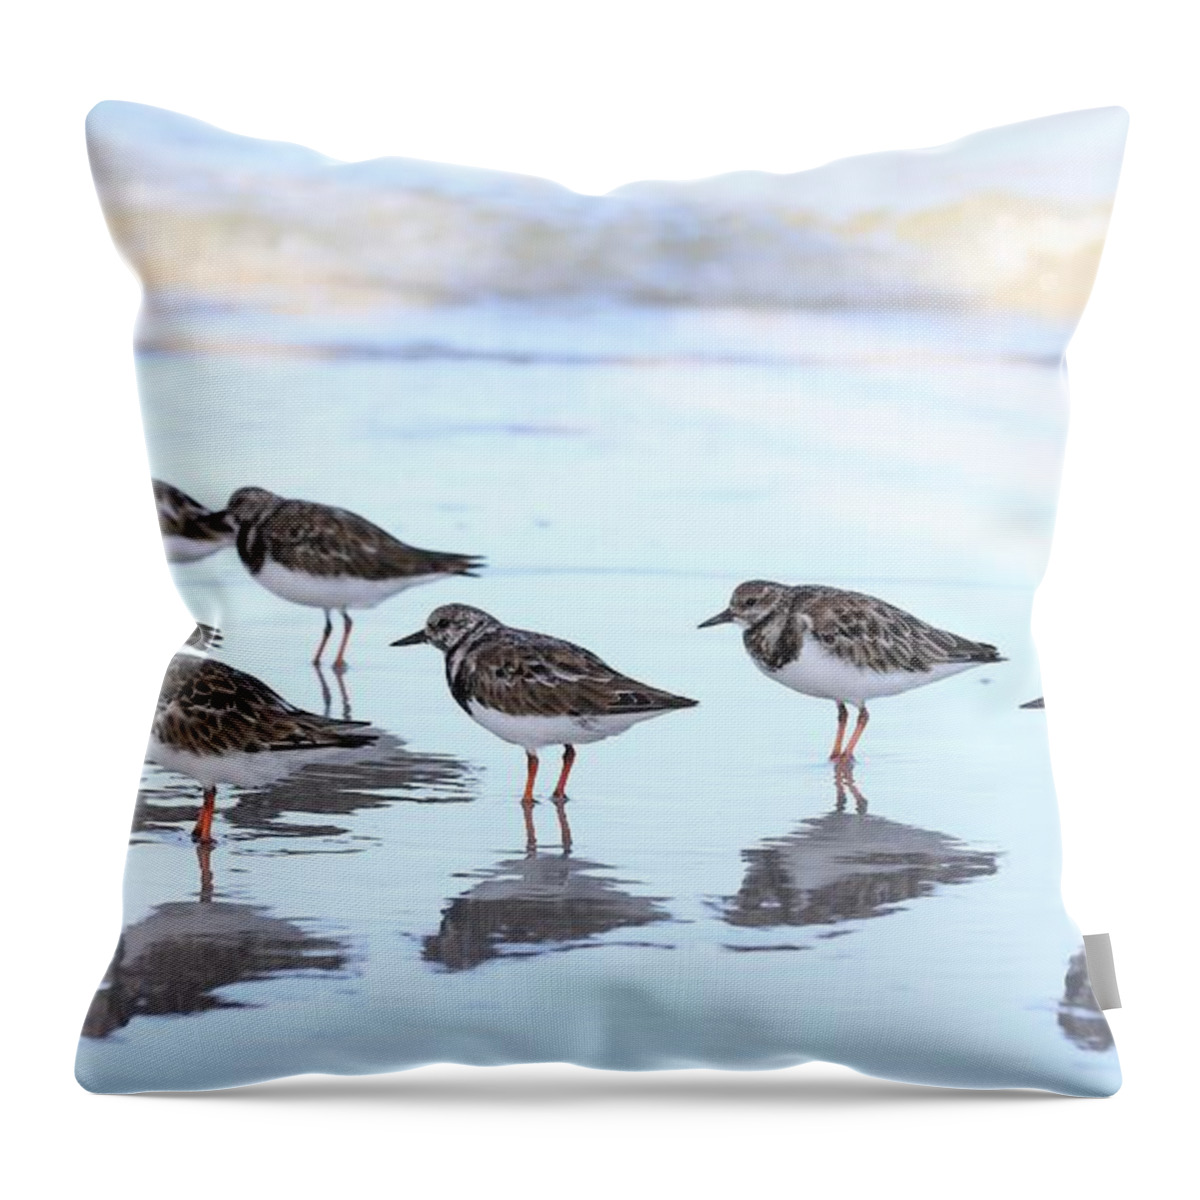 Ruddy Turnstones Throw Pillow featuring the photograph Ruddy Turnstones by Mingming Jiang